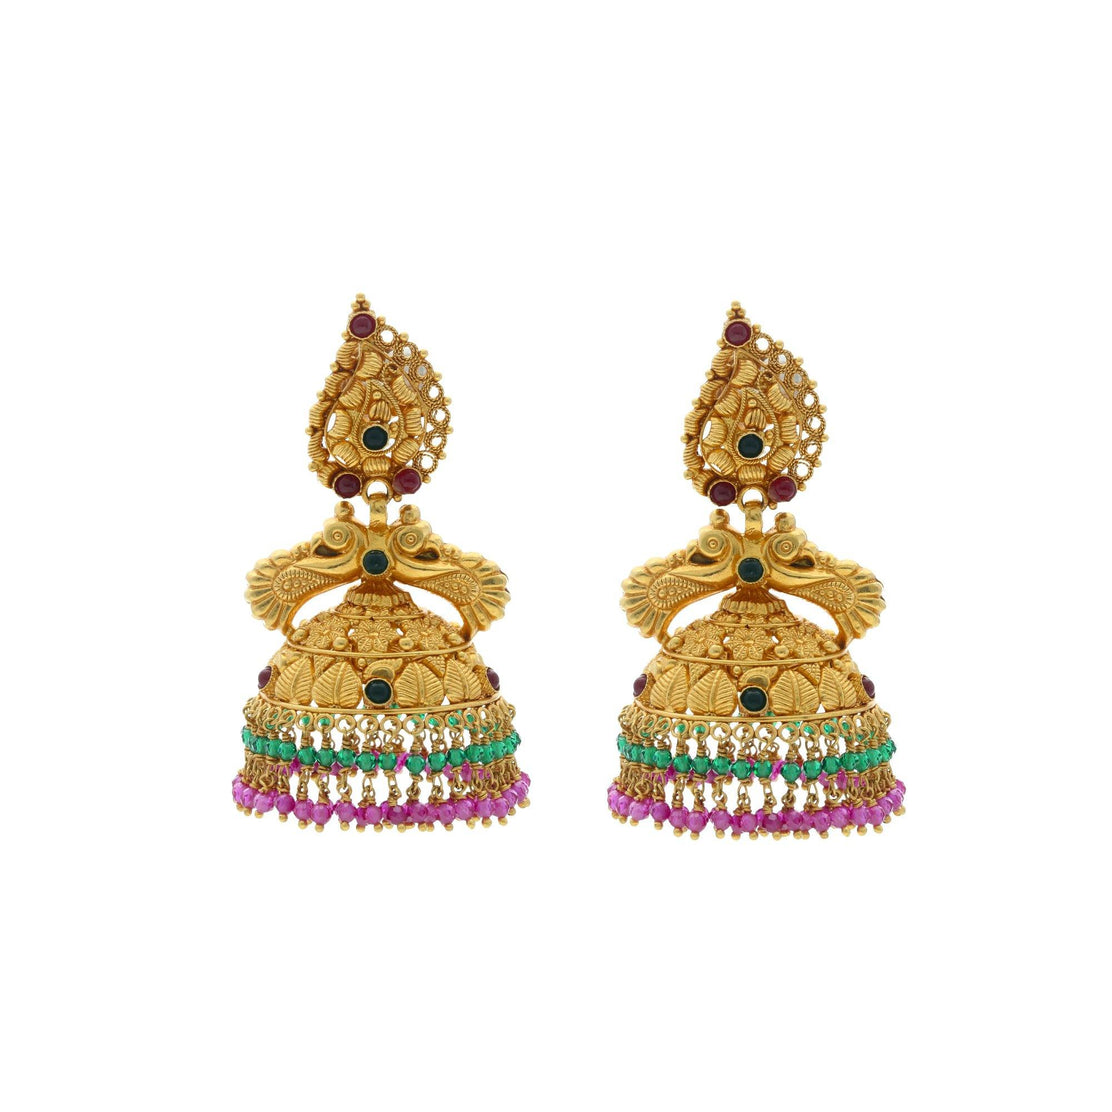 22K Gold Jhumka Earrings - ErFc26082 - US$ 1,862 - 22KT Gold earrings in  layered Jhumkas style with gold balls (ghoogri) hangings at the bottom.  Earrin